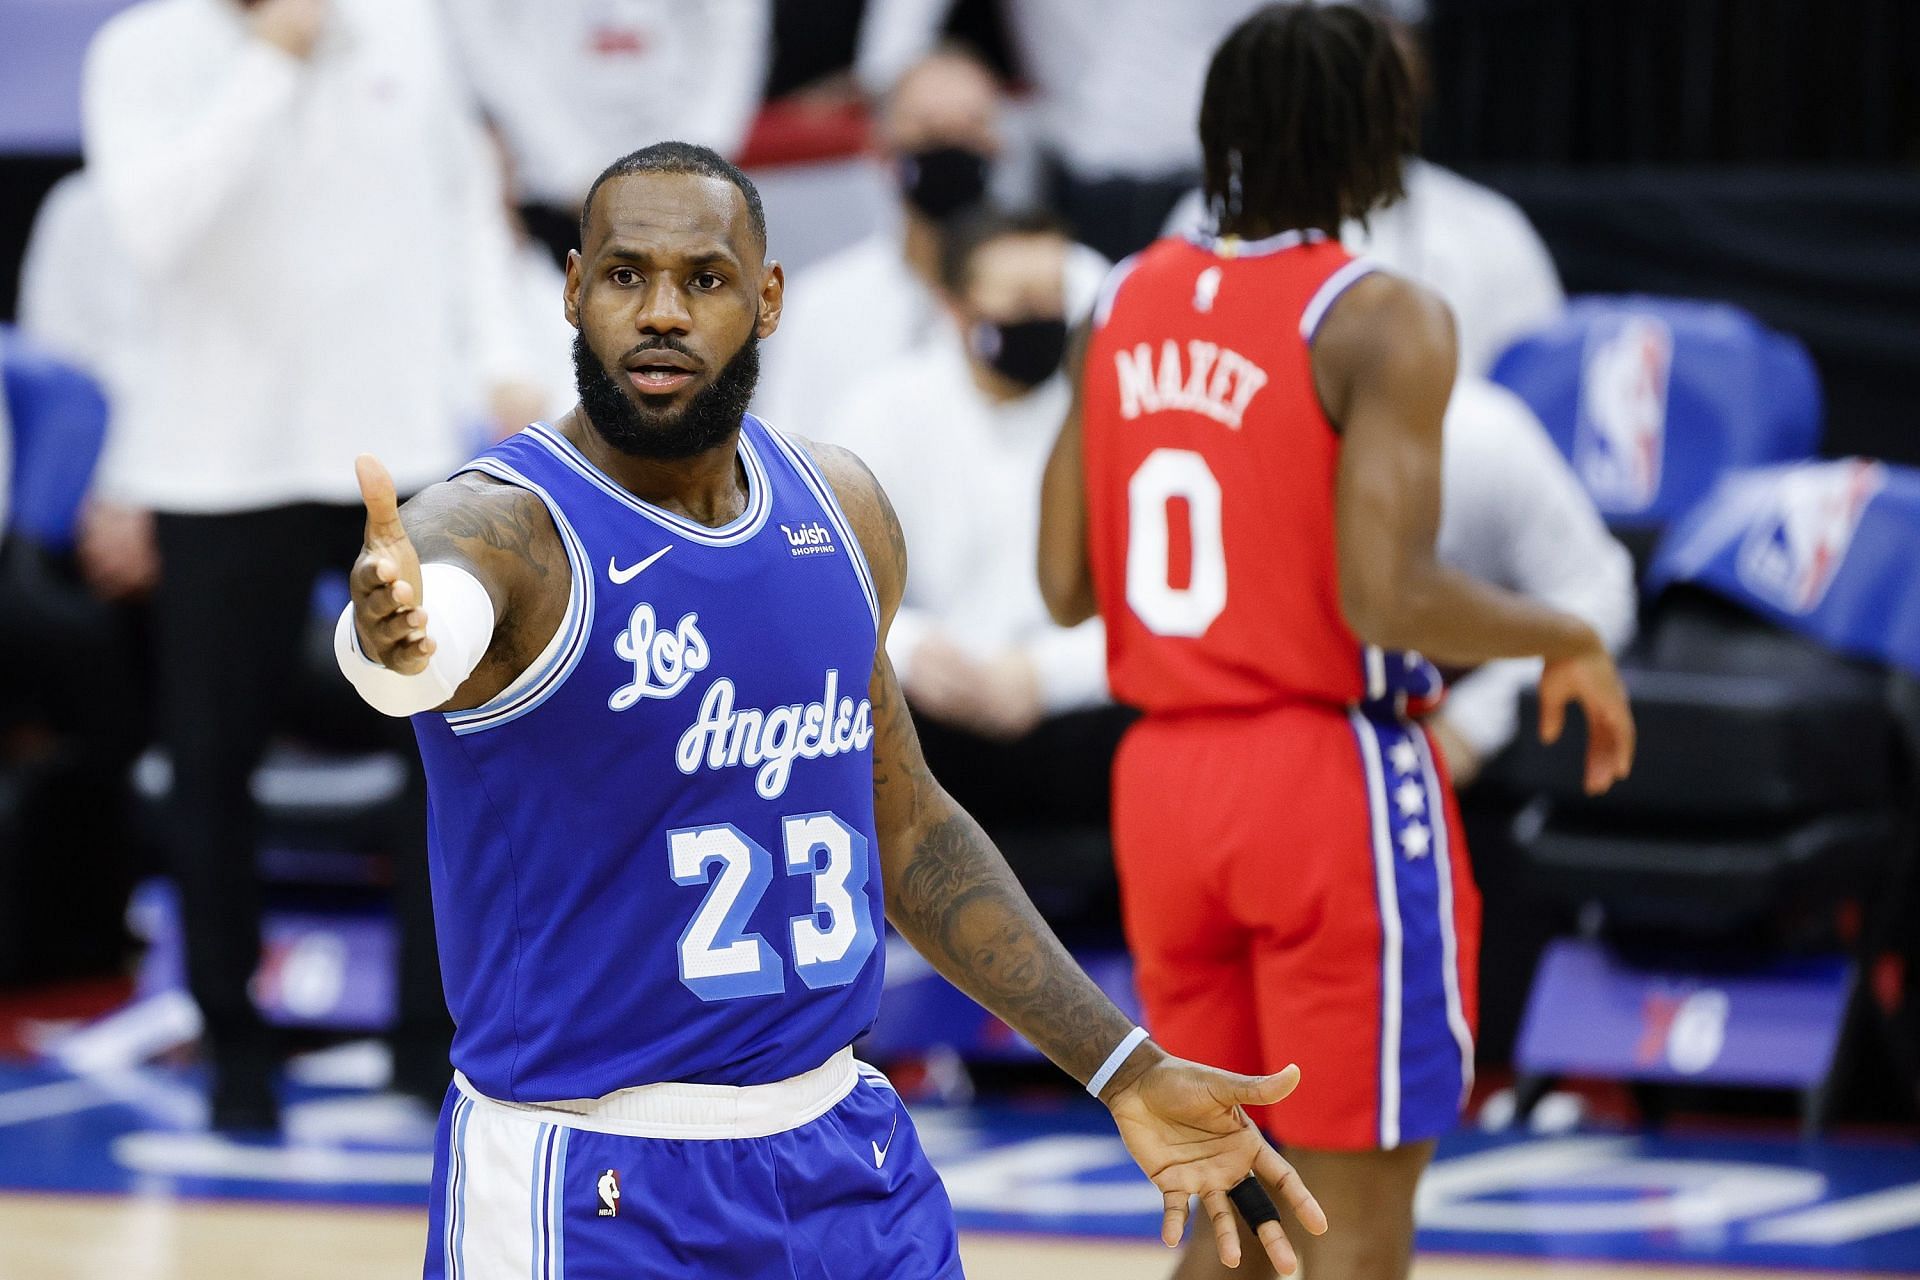 LeBron James of the Los Angeles Lakers against the Philadelphia 76ers.